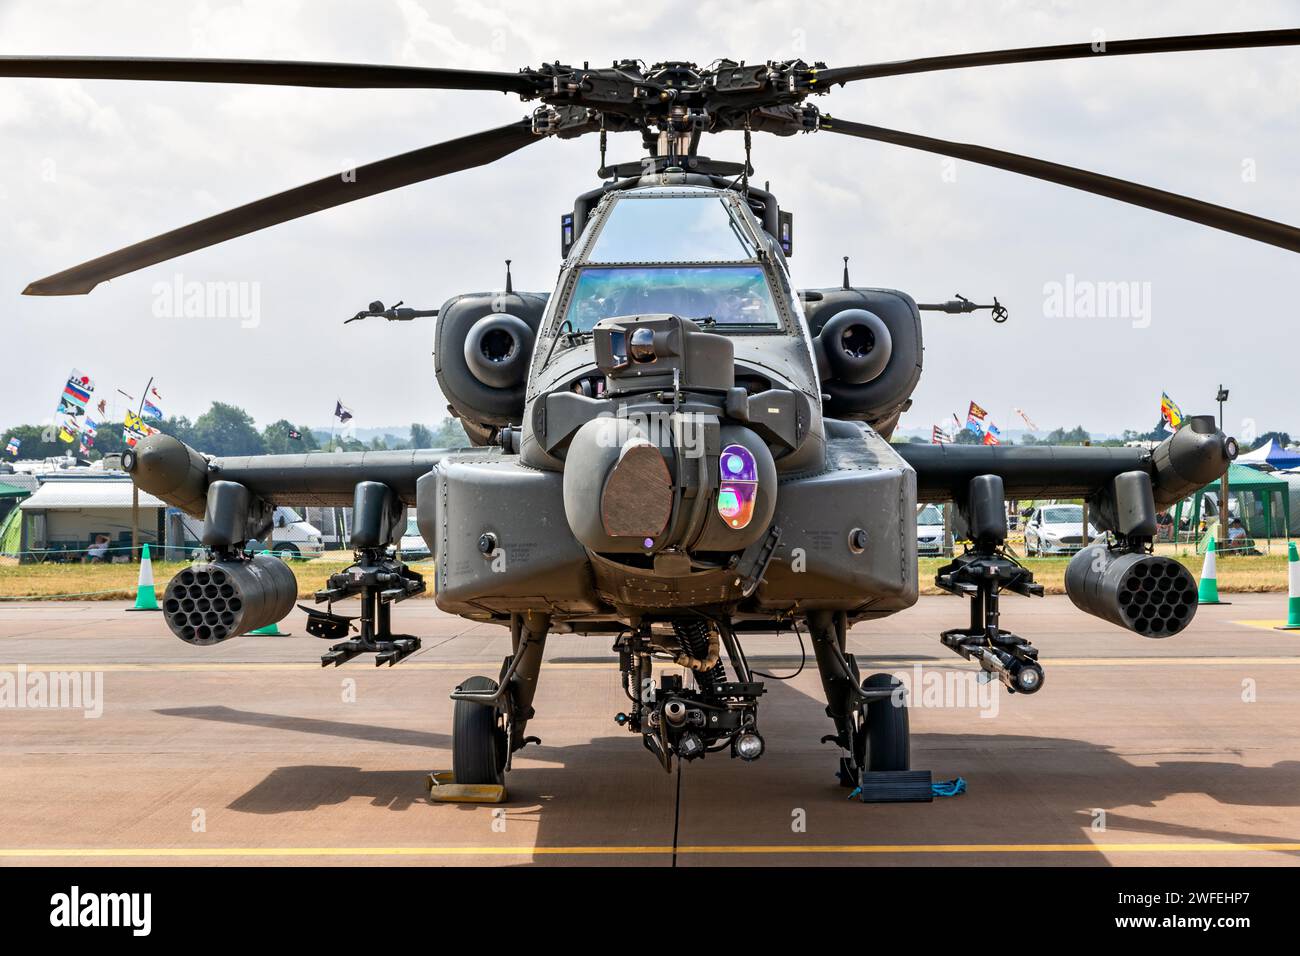 Boeing AH-64D Apache Attack Helicopter on the tarmac of RAF Fairford. UK - July 13, 2018 Stock Photo